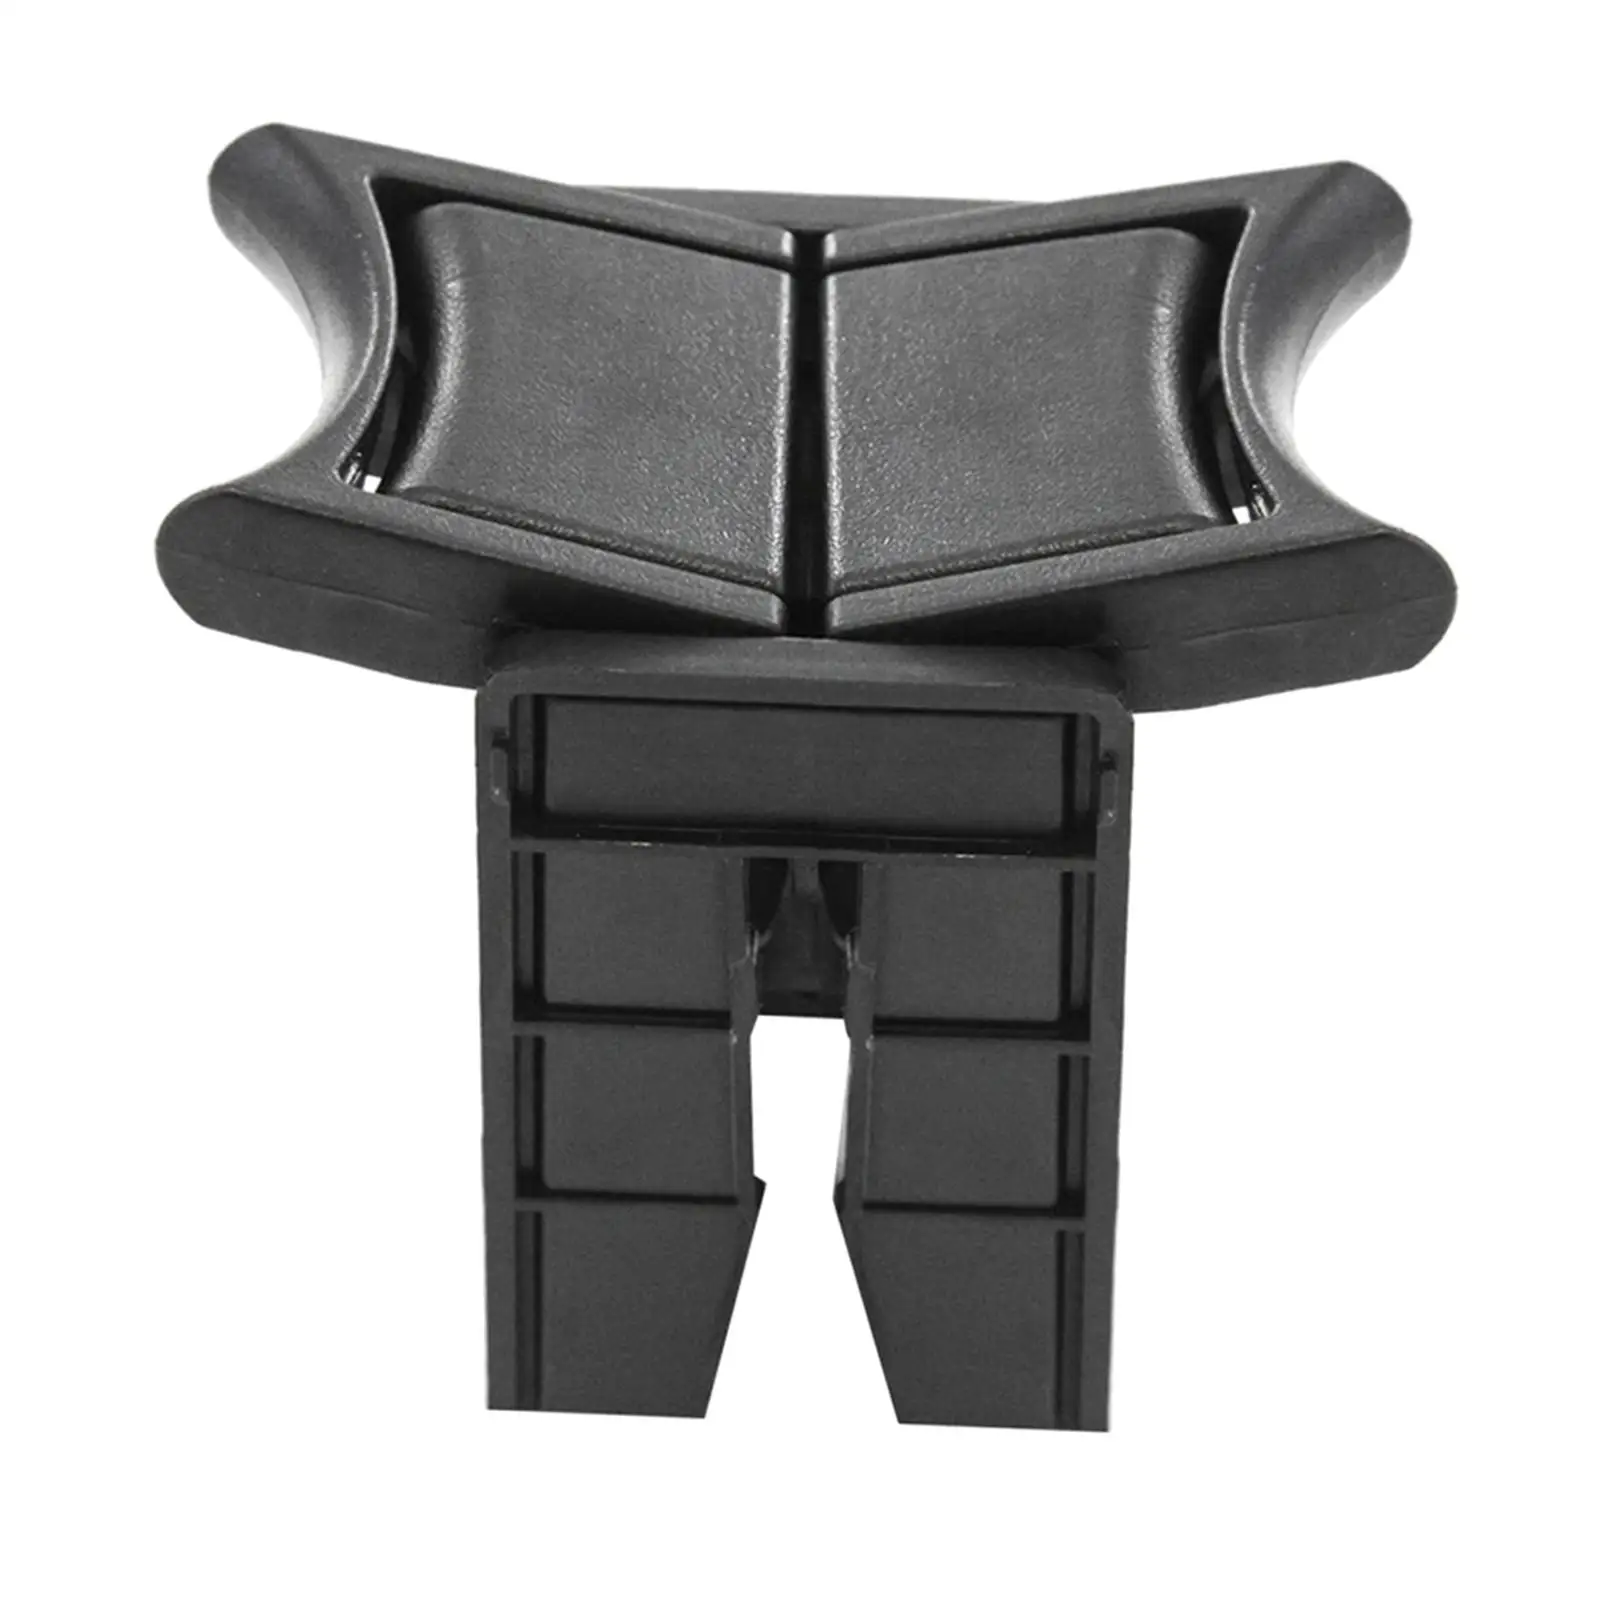 Center Console Cup Holder Divider Gn62106460 Gn621-06460 5561806050 Black 41024 for   Accessories